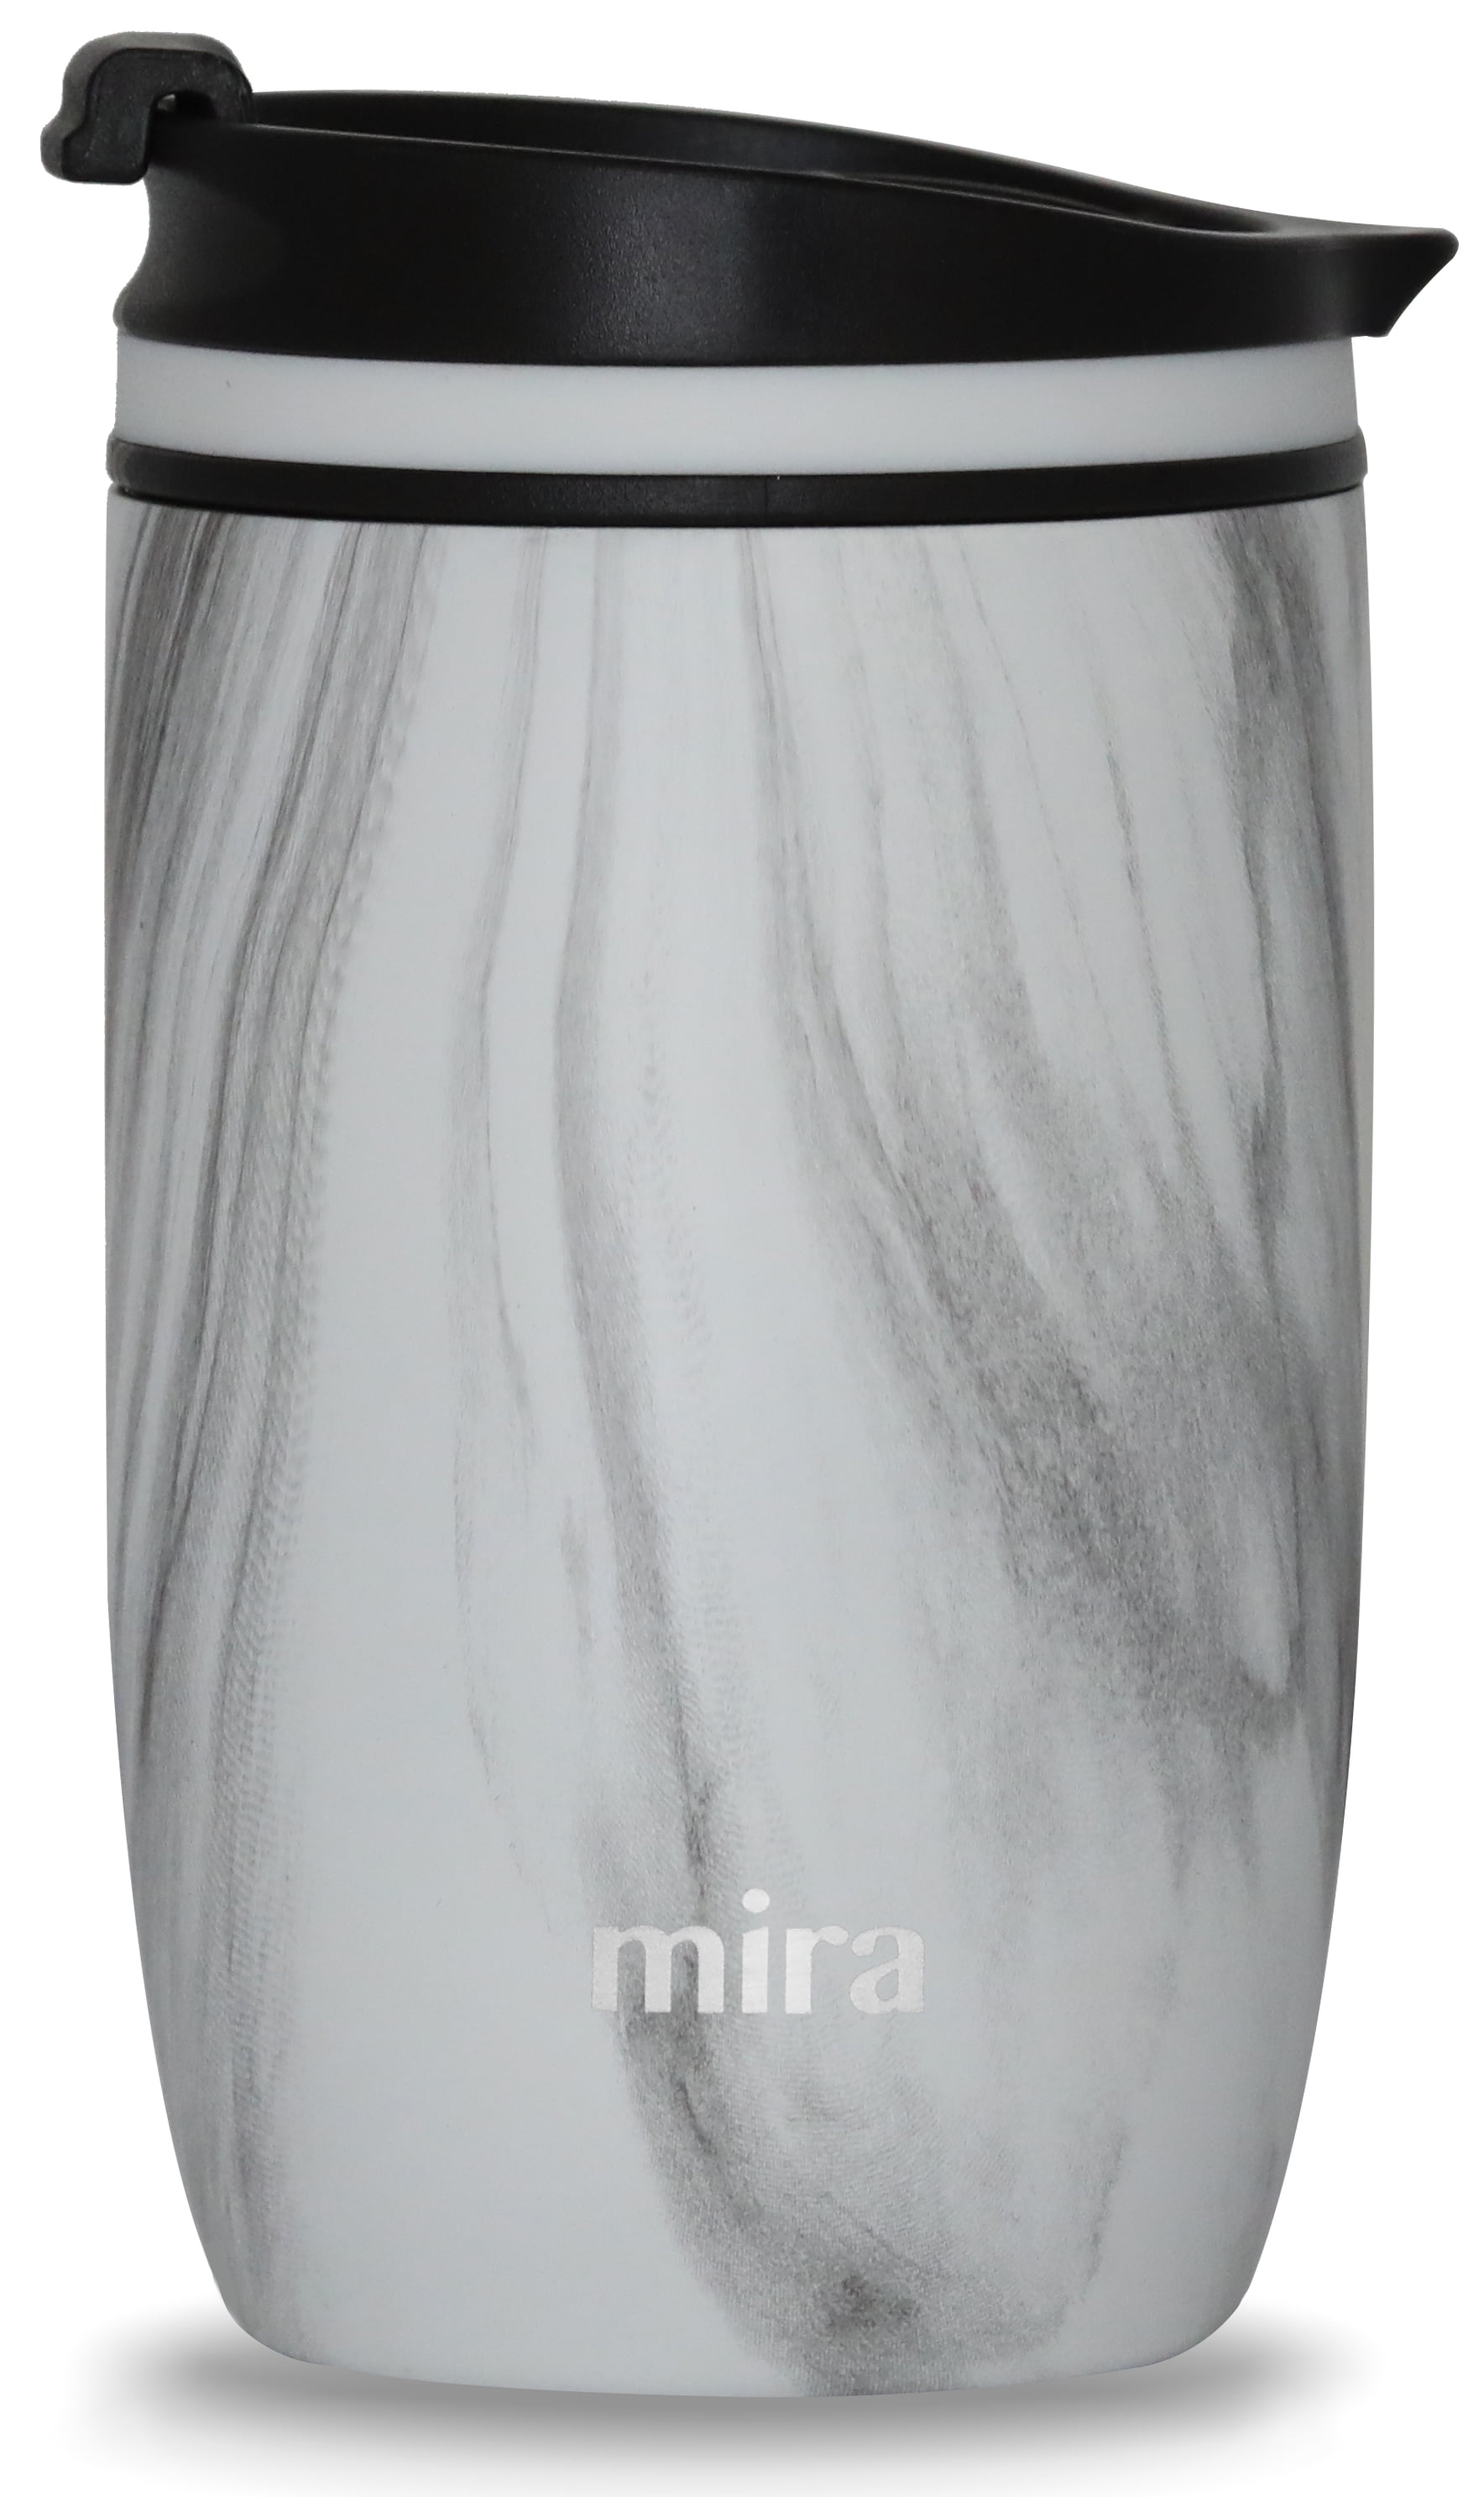 MIRA Coffee Travel Mug Insulated Stainless Steel Thermos Cup, Screw Lid  Tumbler, 12 oz, French Granite